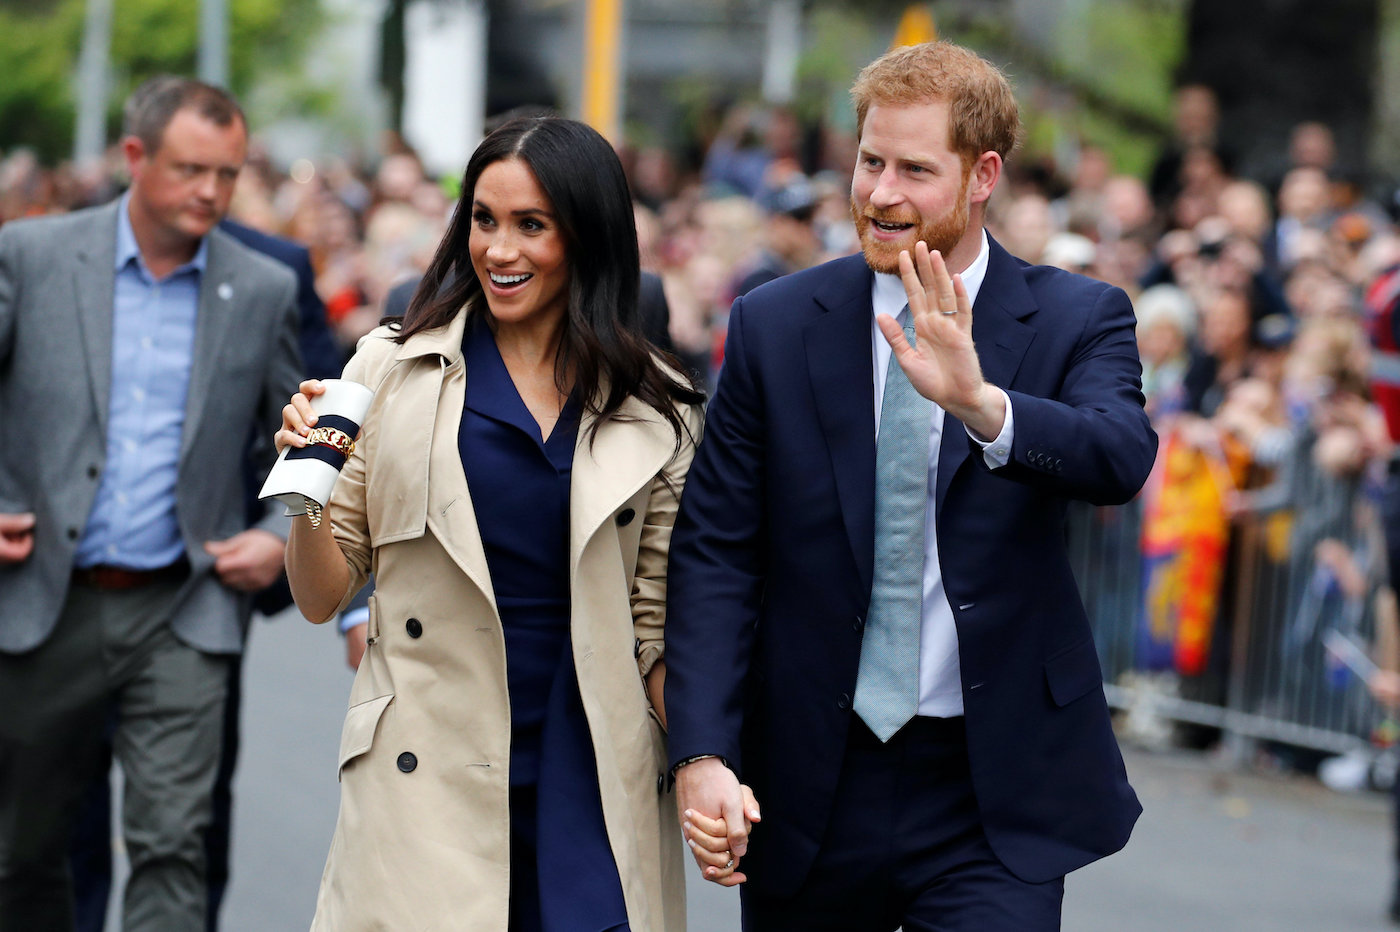 Meghan Markle and Prince Harry wave to crowds during a visit Australia in 2018